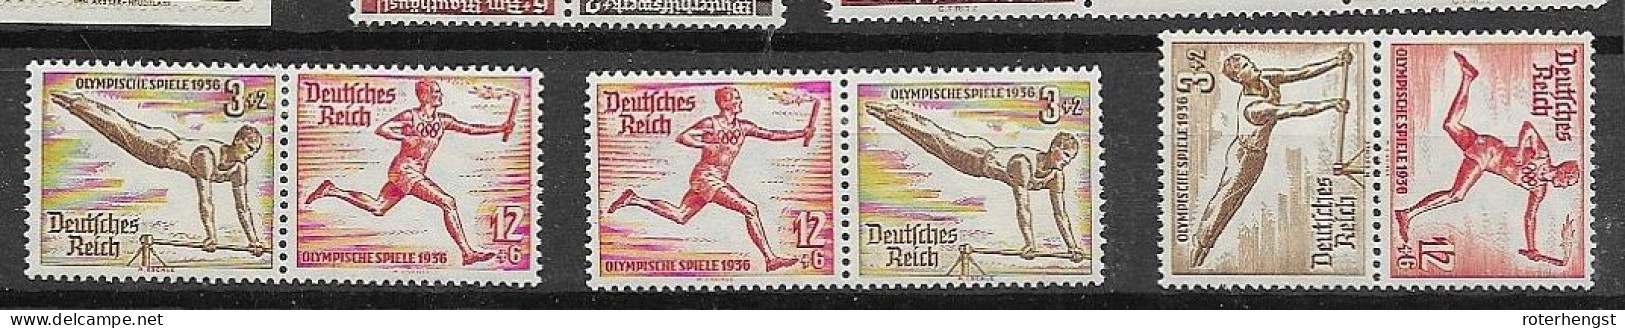 Reich From Booklet Panes 1936 Mlh *  And Mnh ** (right Better Pair) 44 Euros - Markenheftchen